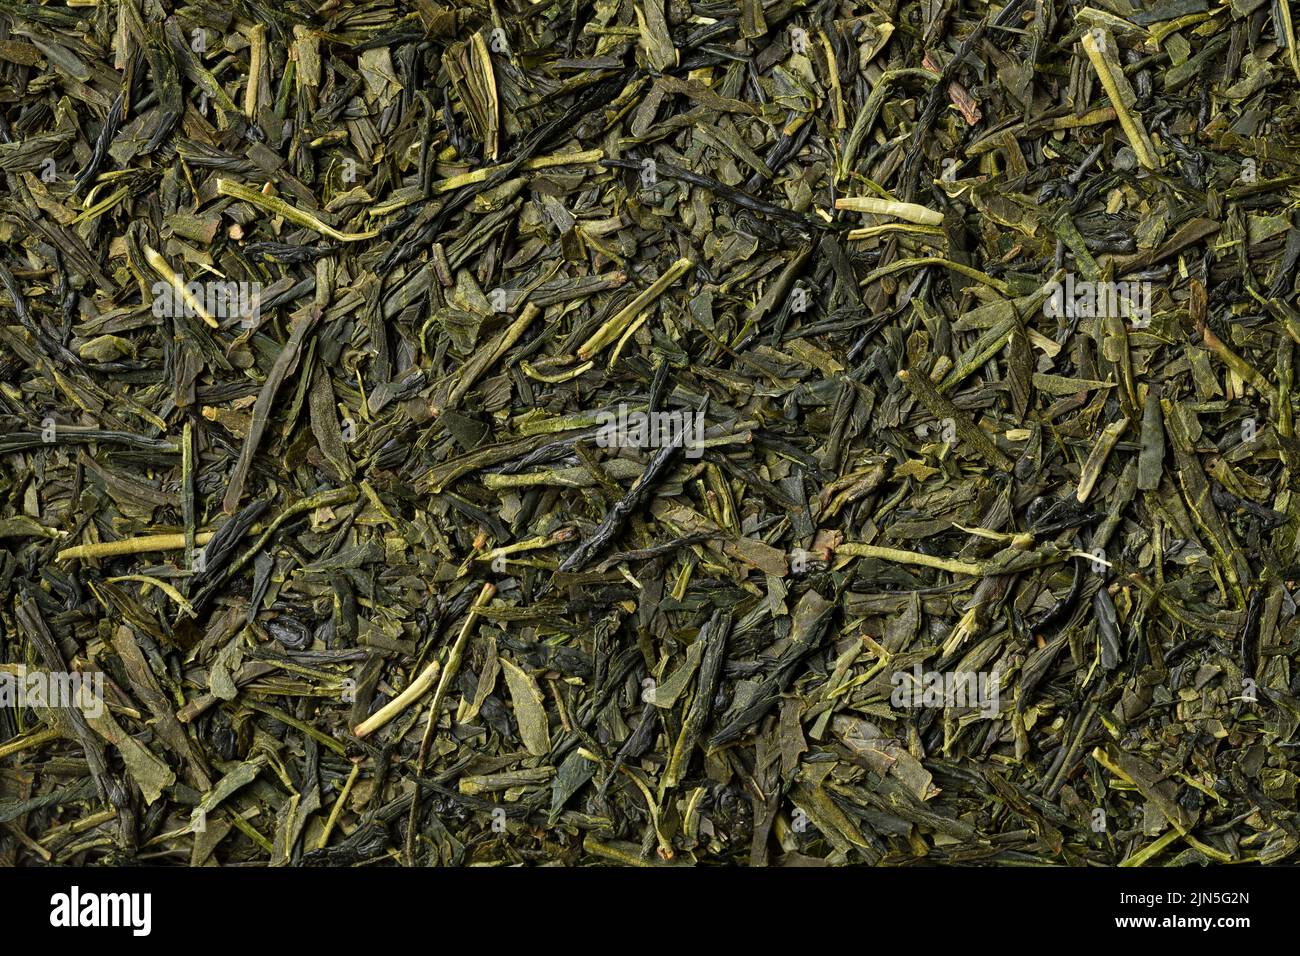 Heap of Sencha Superior dried tea leaves full frame as background close up Stock Photo